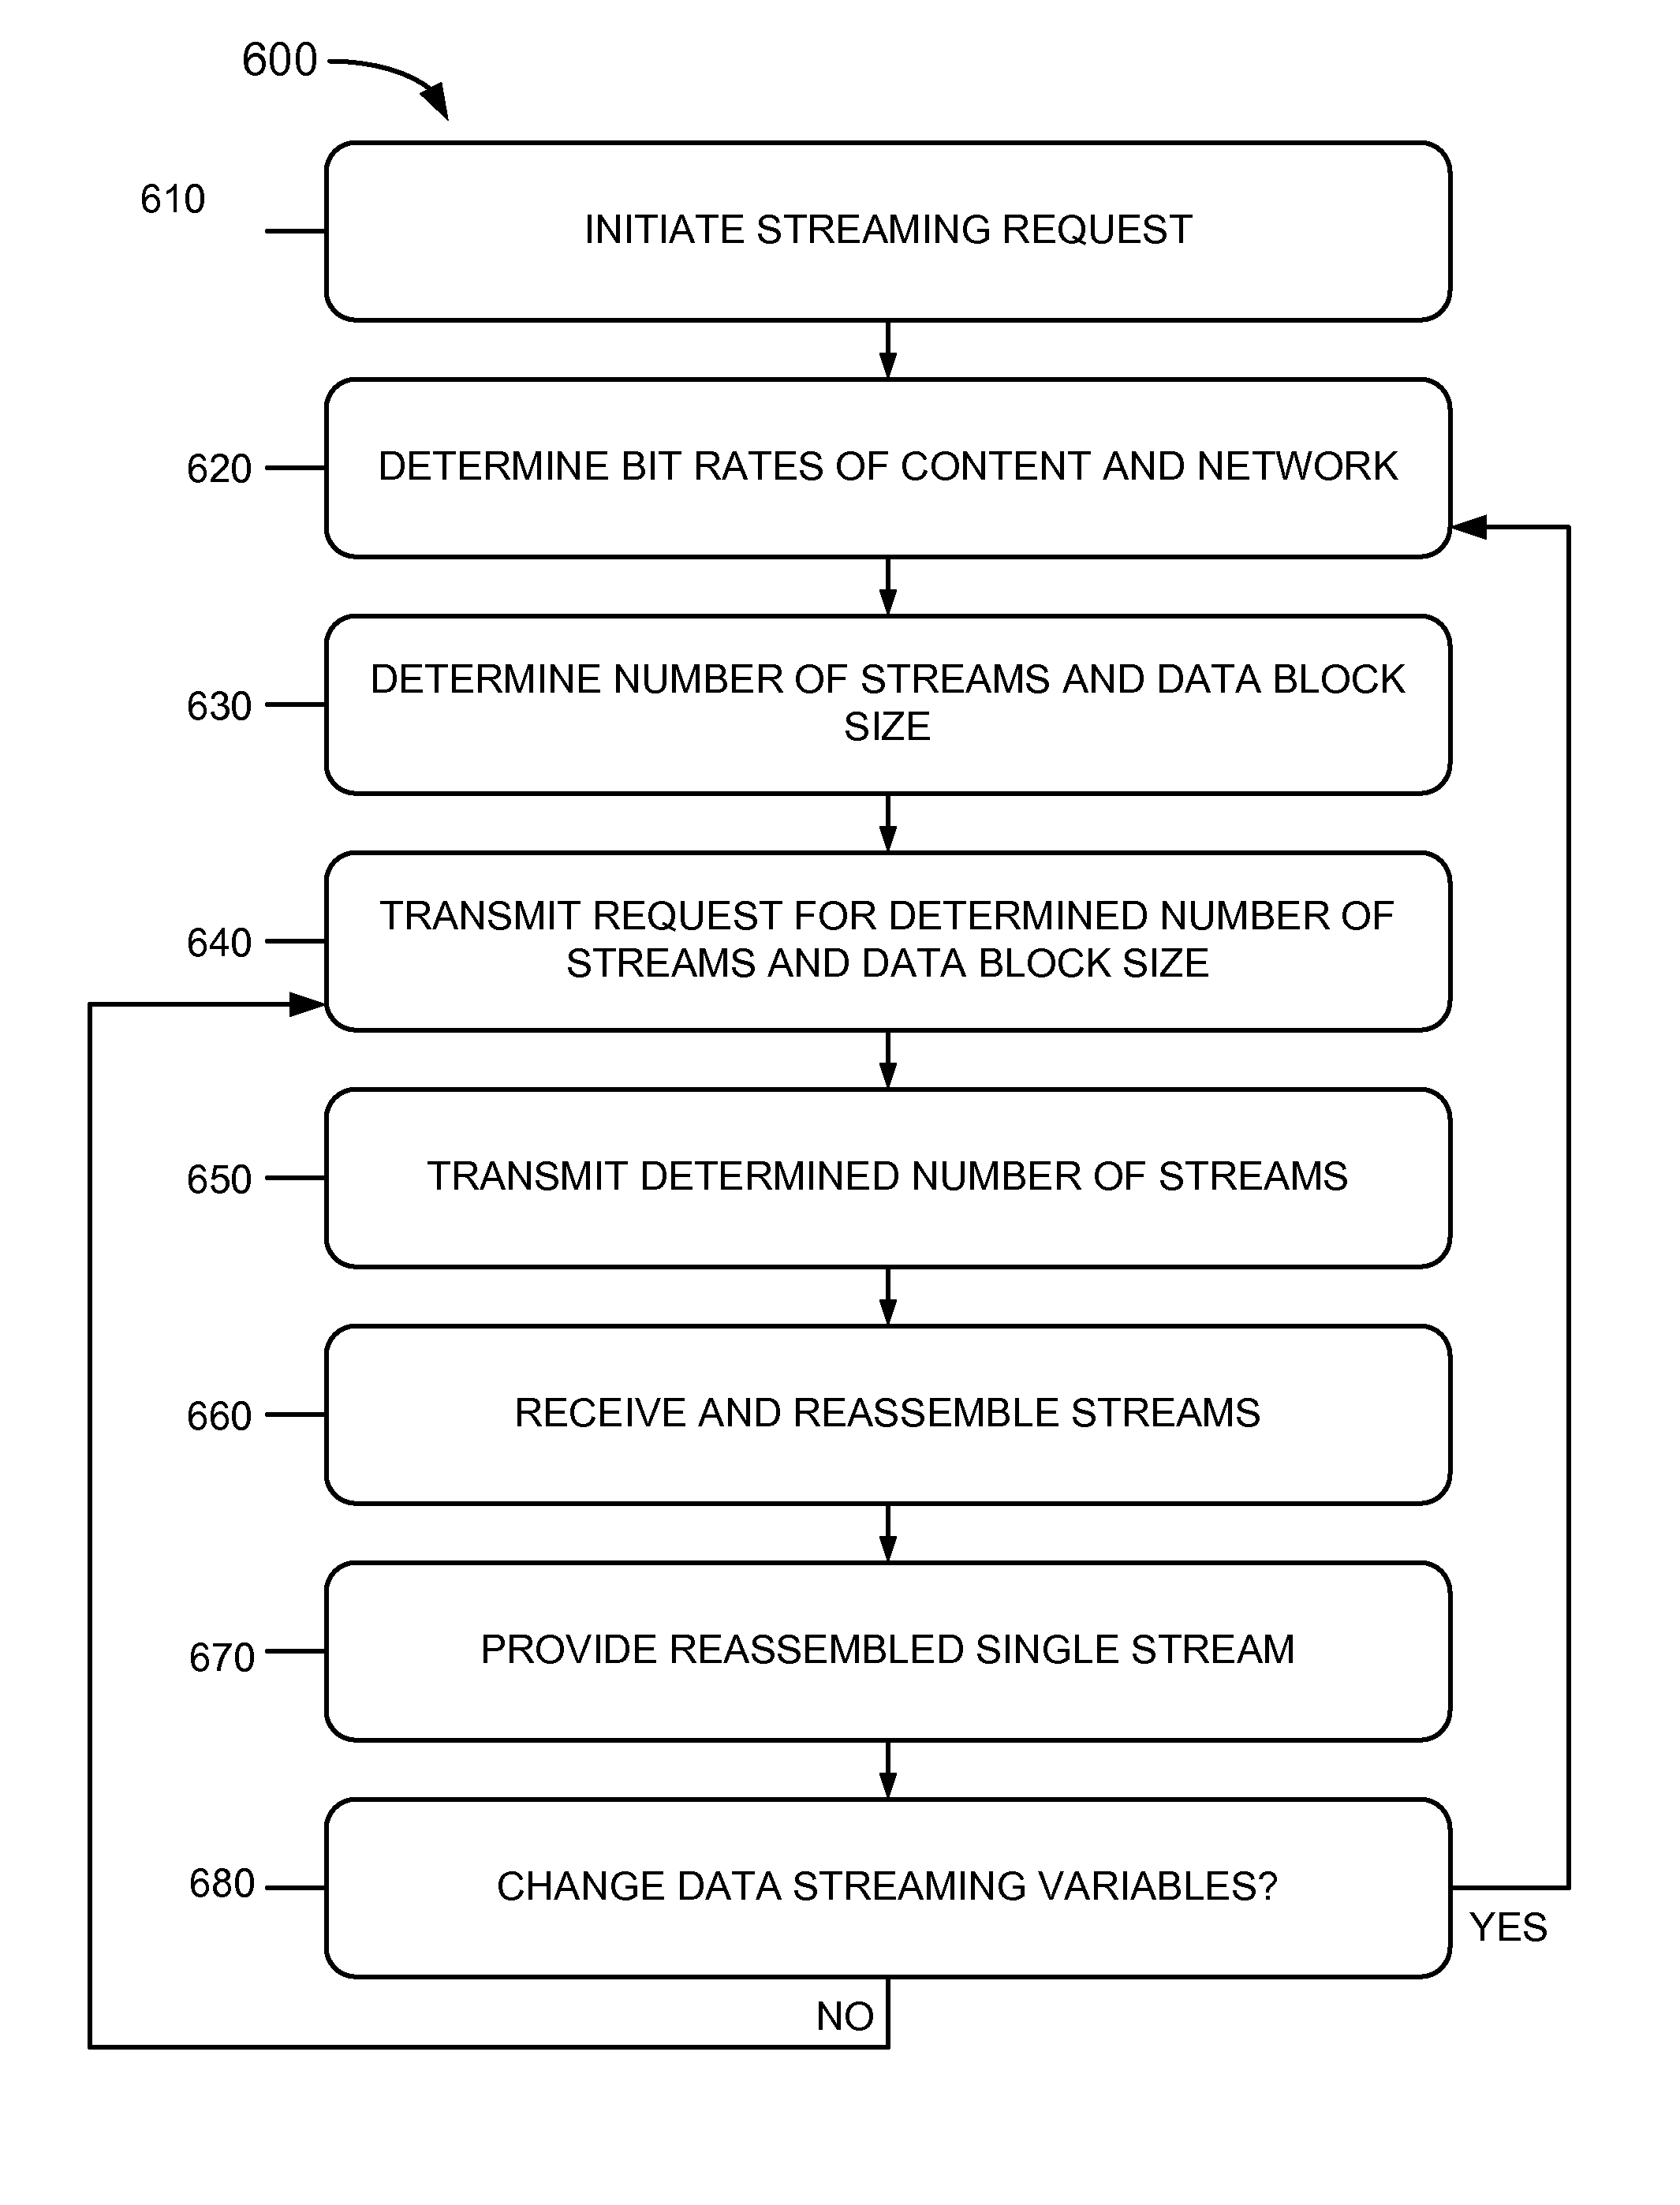 Systems and methods for data streaming